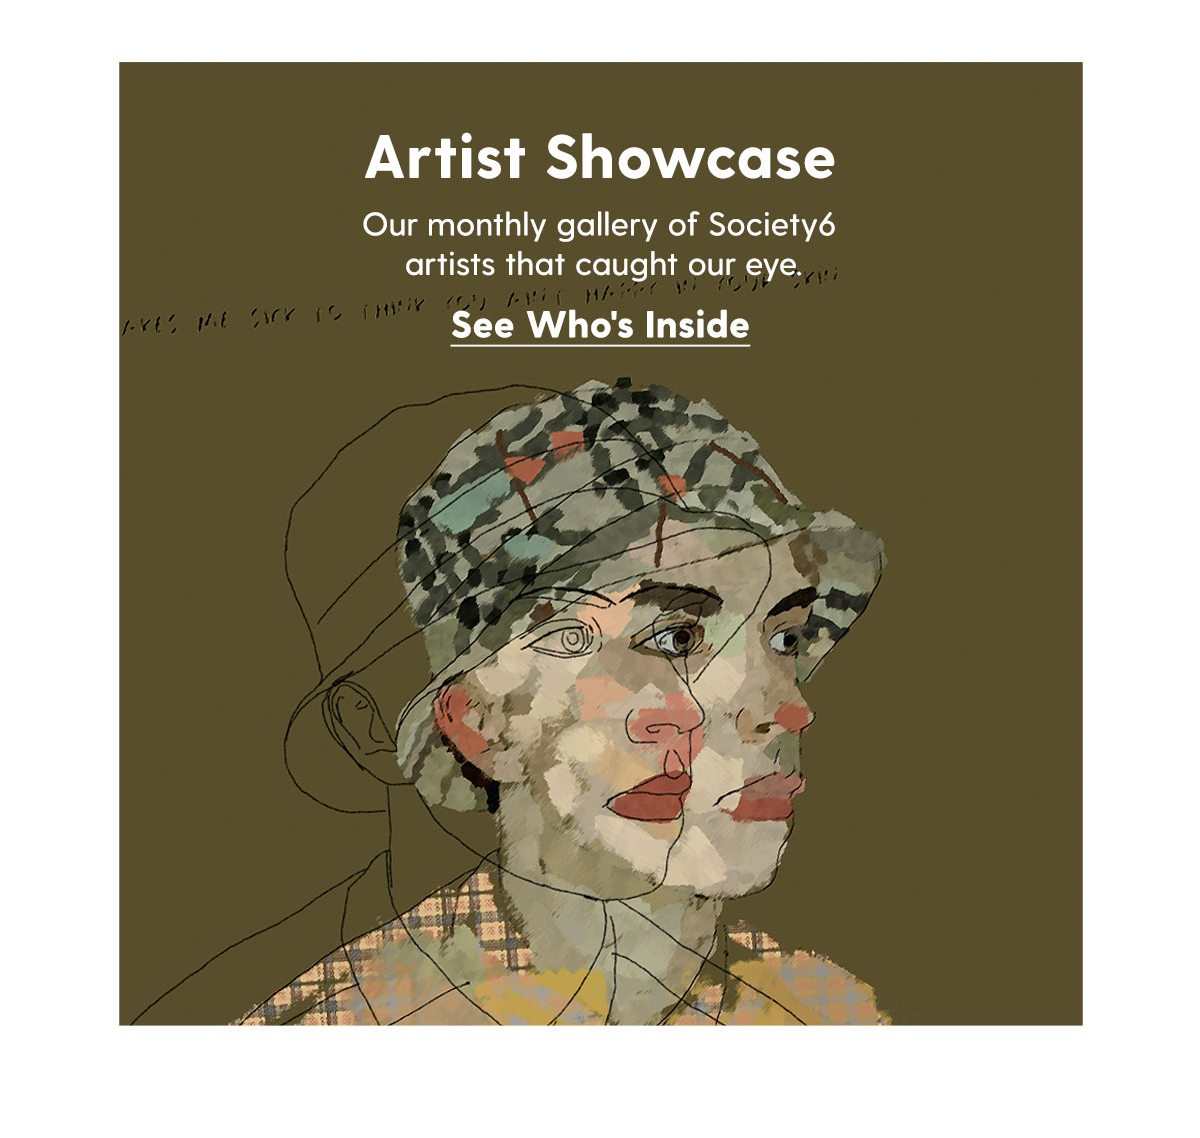 Artist Showcase Our monthly gallery of Society6 artists that caught our eye. Shop Now